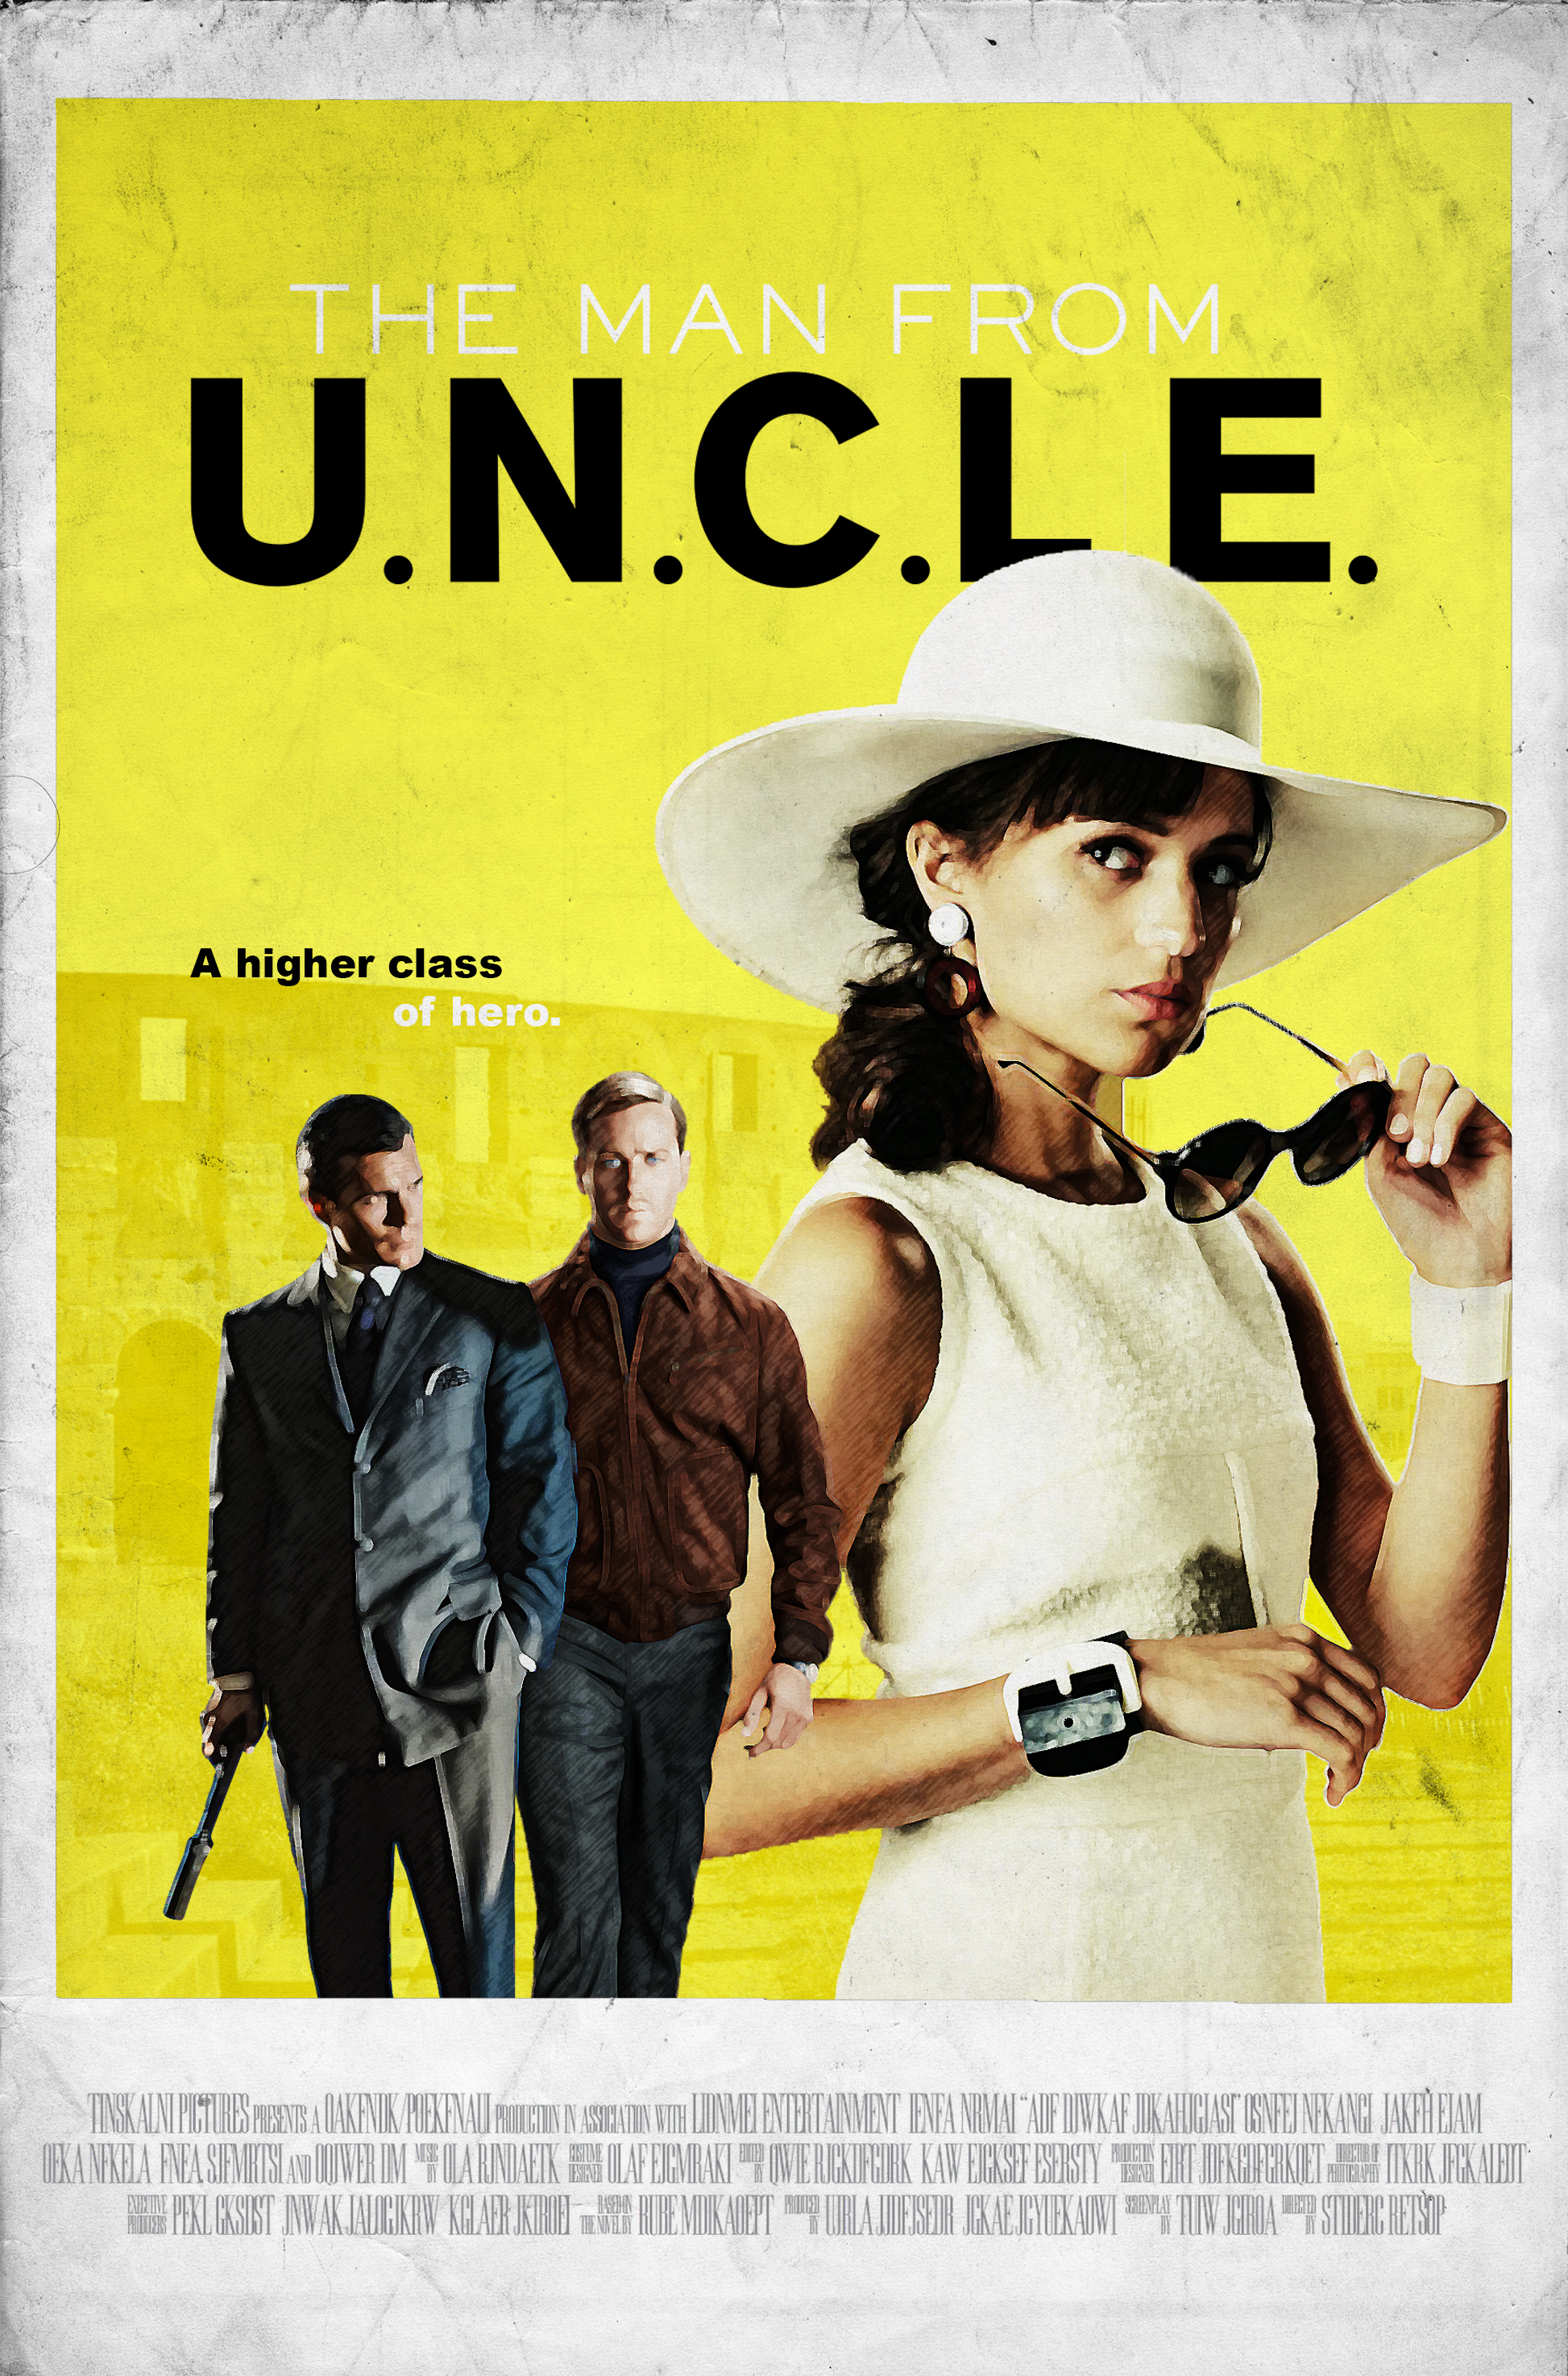 the_man_from_uncle___retro_poster_by_swannmadeleine-daamf3w.jpg